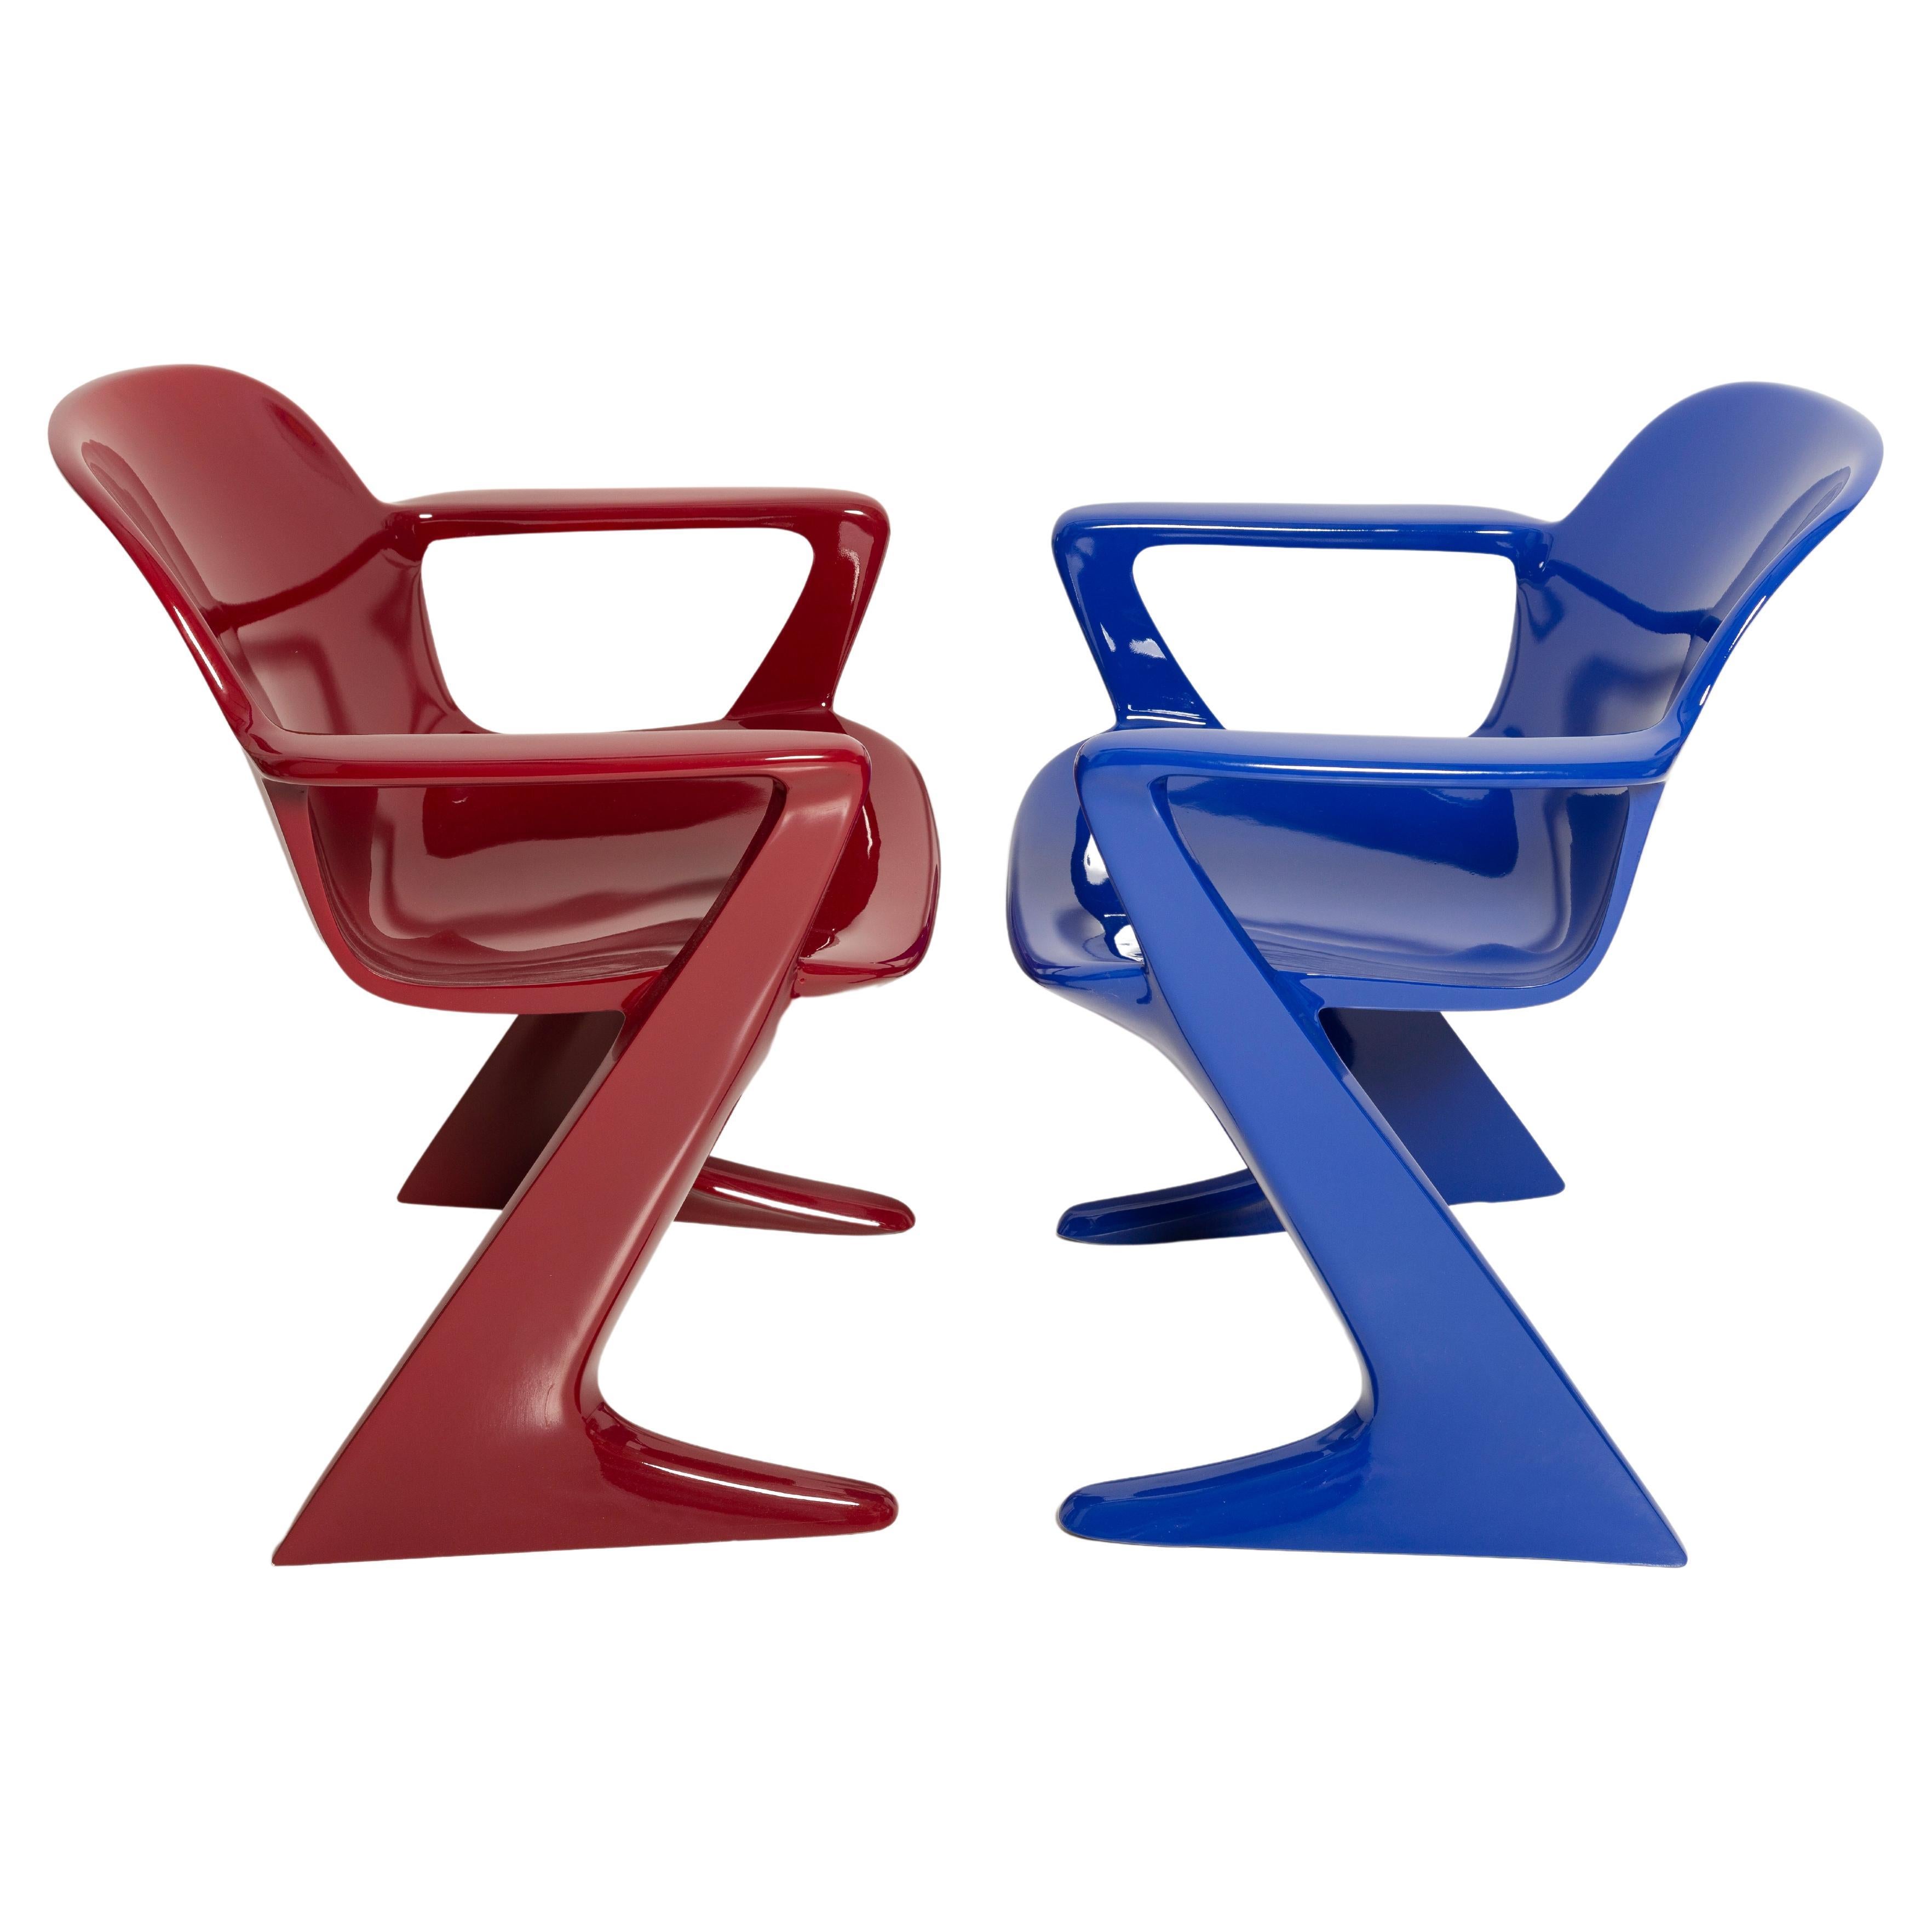 Two Mid-Century Burgundy Red and Blue Kangaroo Chairs Ernst Moeckl Germany, 1968 For Sale